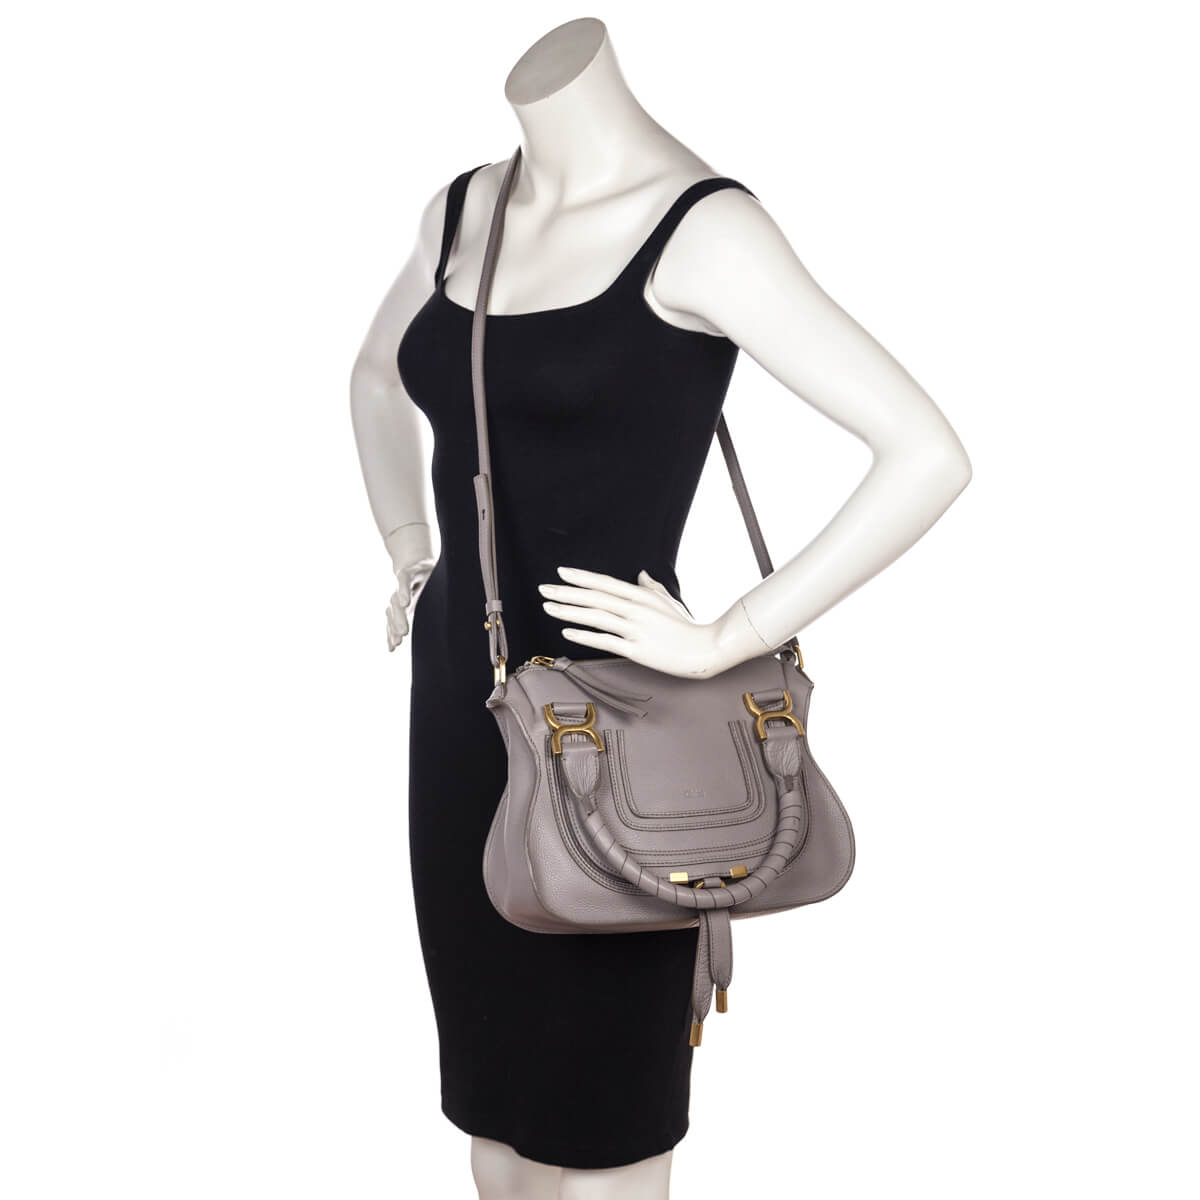 Chloe Cashmere Grey Calfskin Small Marcie Satchel - Love that Bag etc - Preowned Authentic Designer Handbags & Preloved Fashions